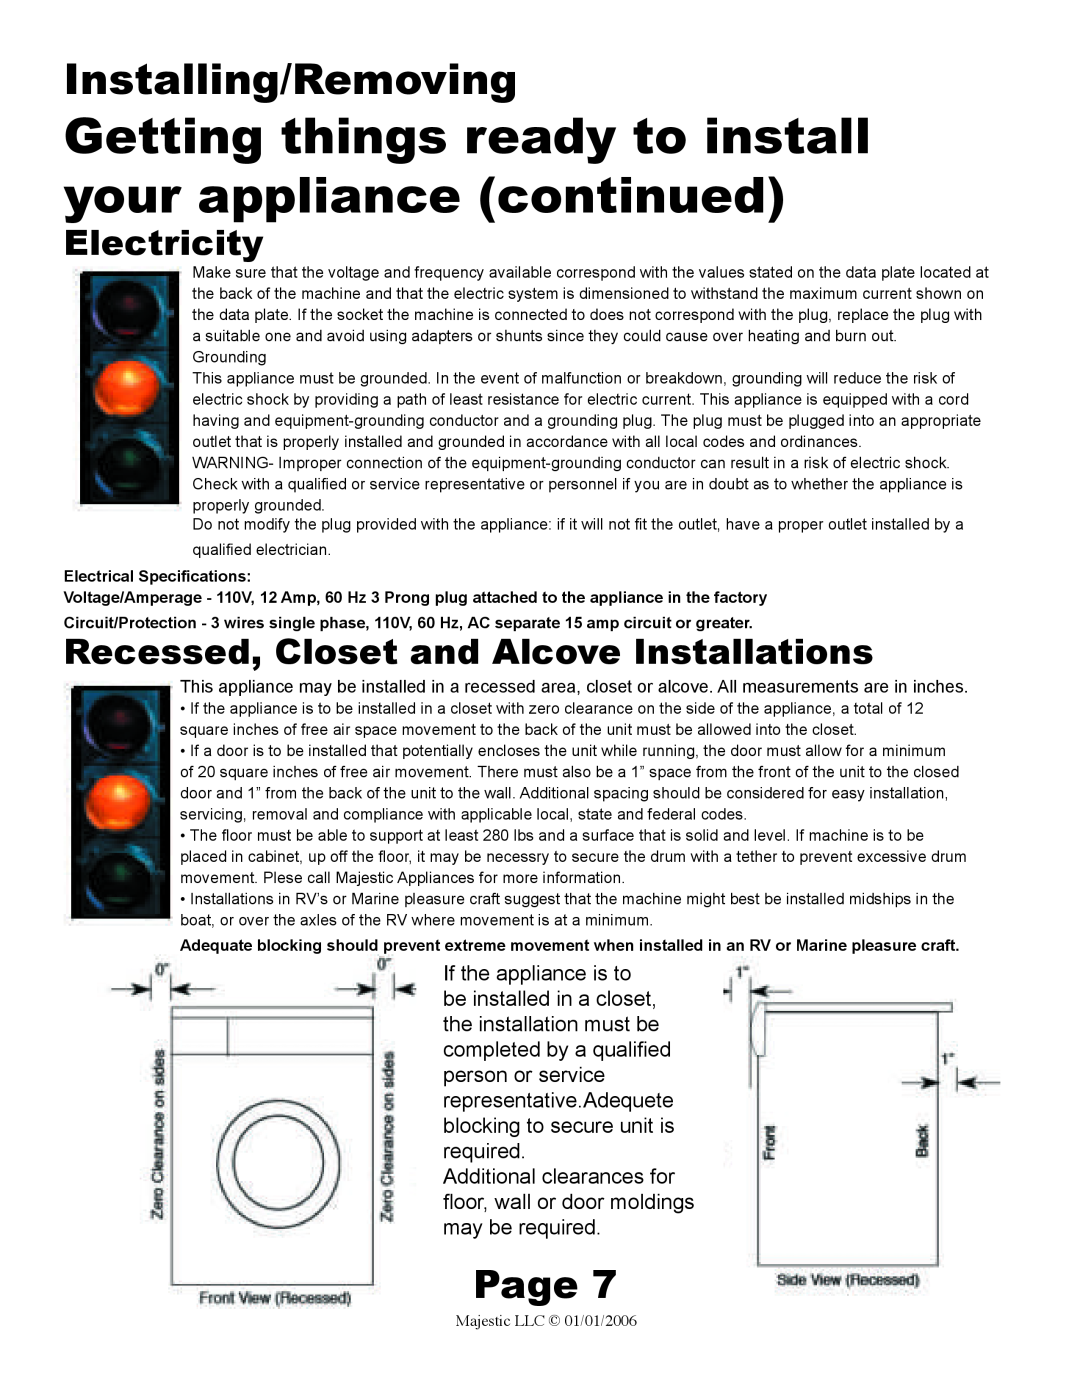 Majestic Appliances MJ-9200W owner manual Electricity, Recessed, Closet and Alcove Installations, Installing/Removing, Page 